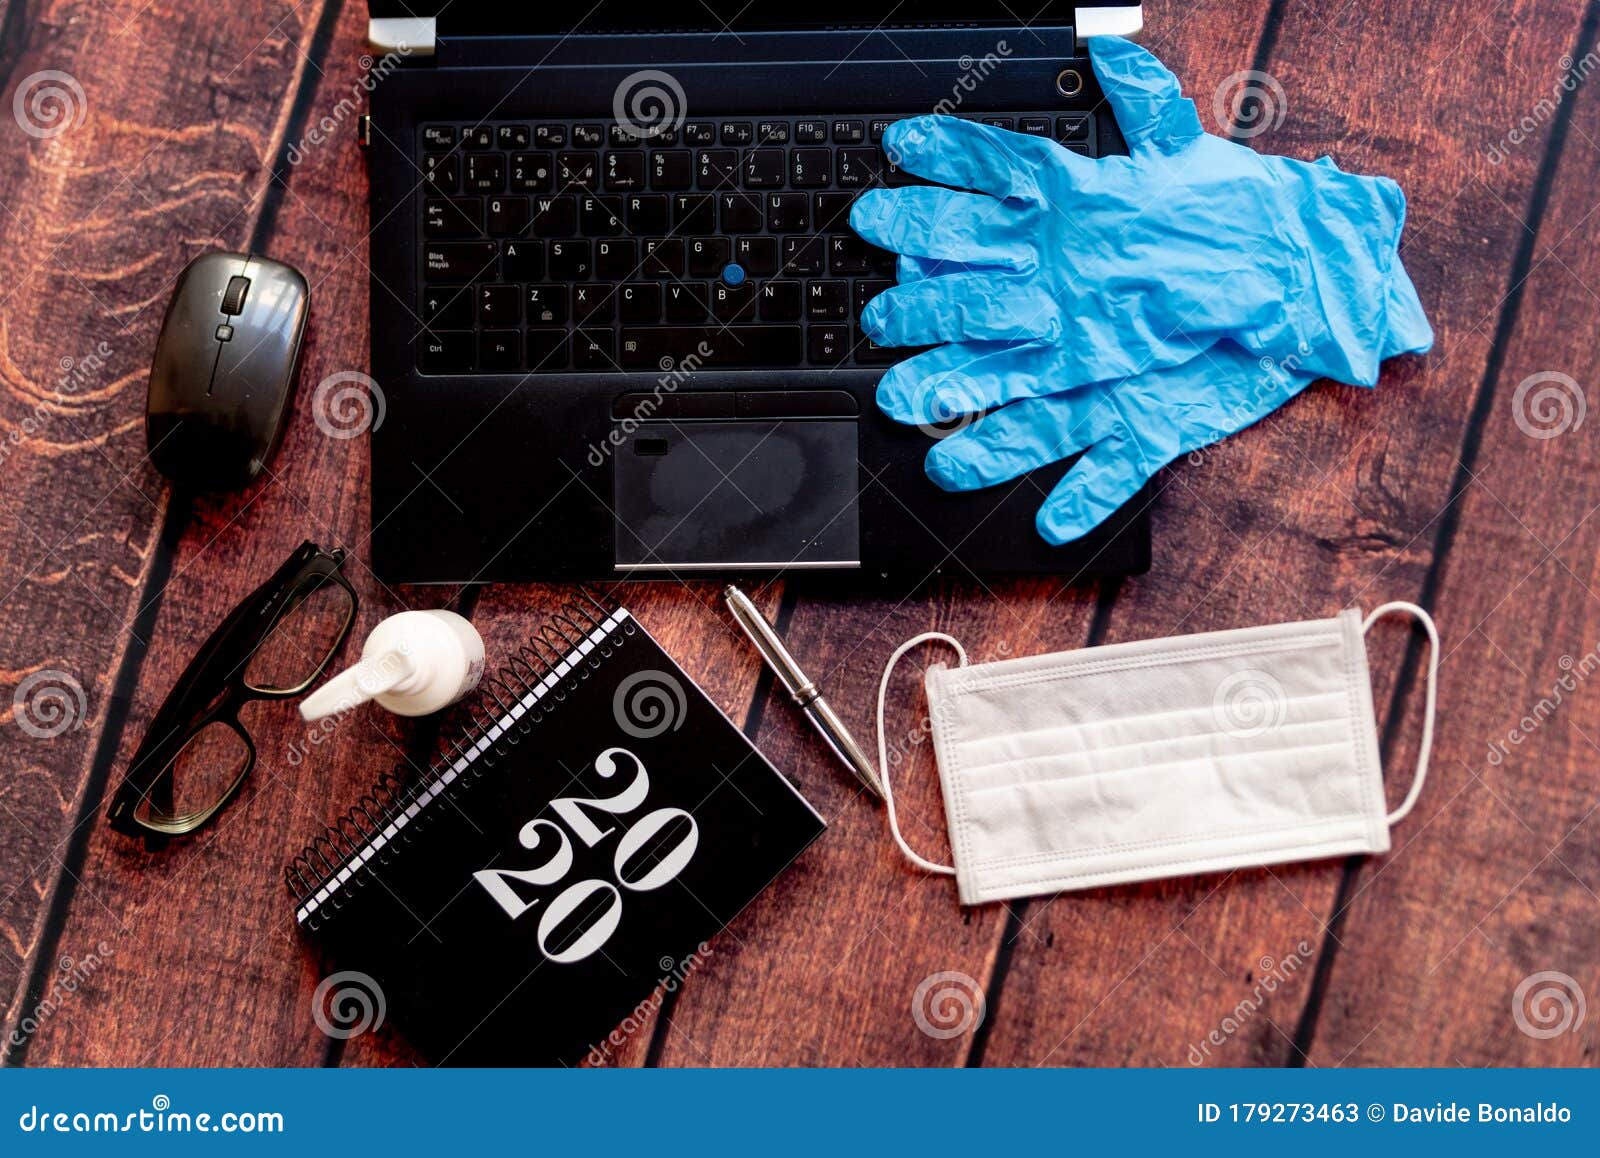 top view of coronavirus remote work kit on wooden office desk with hand sanitizer and face mask, a solution against the spread of